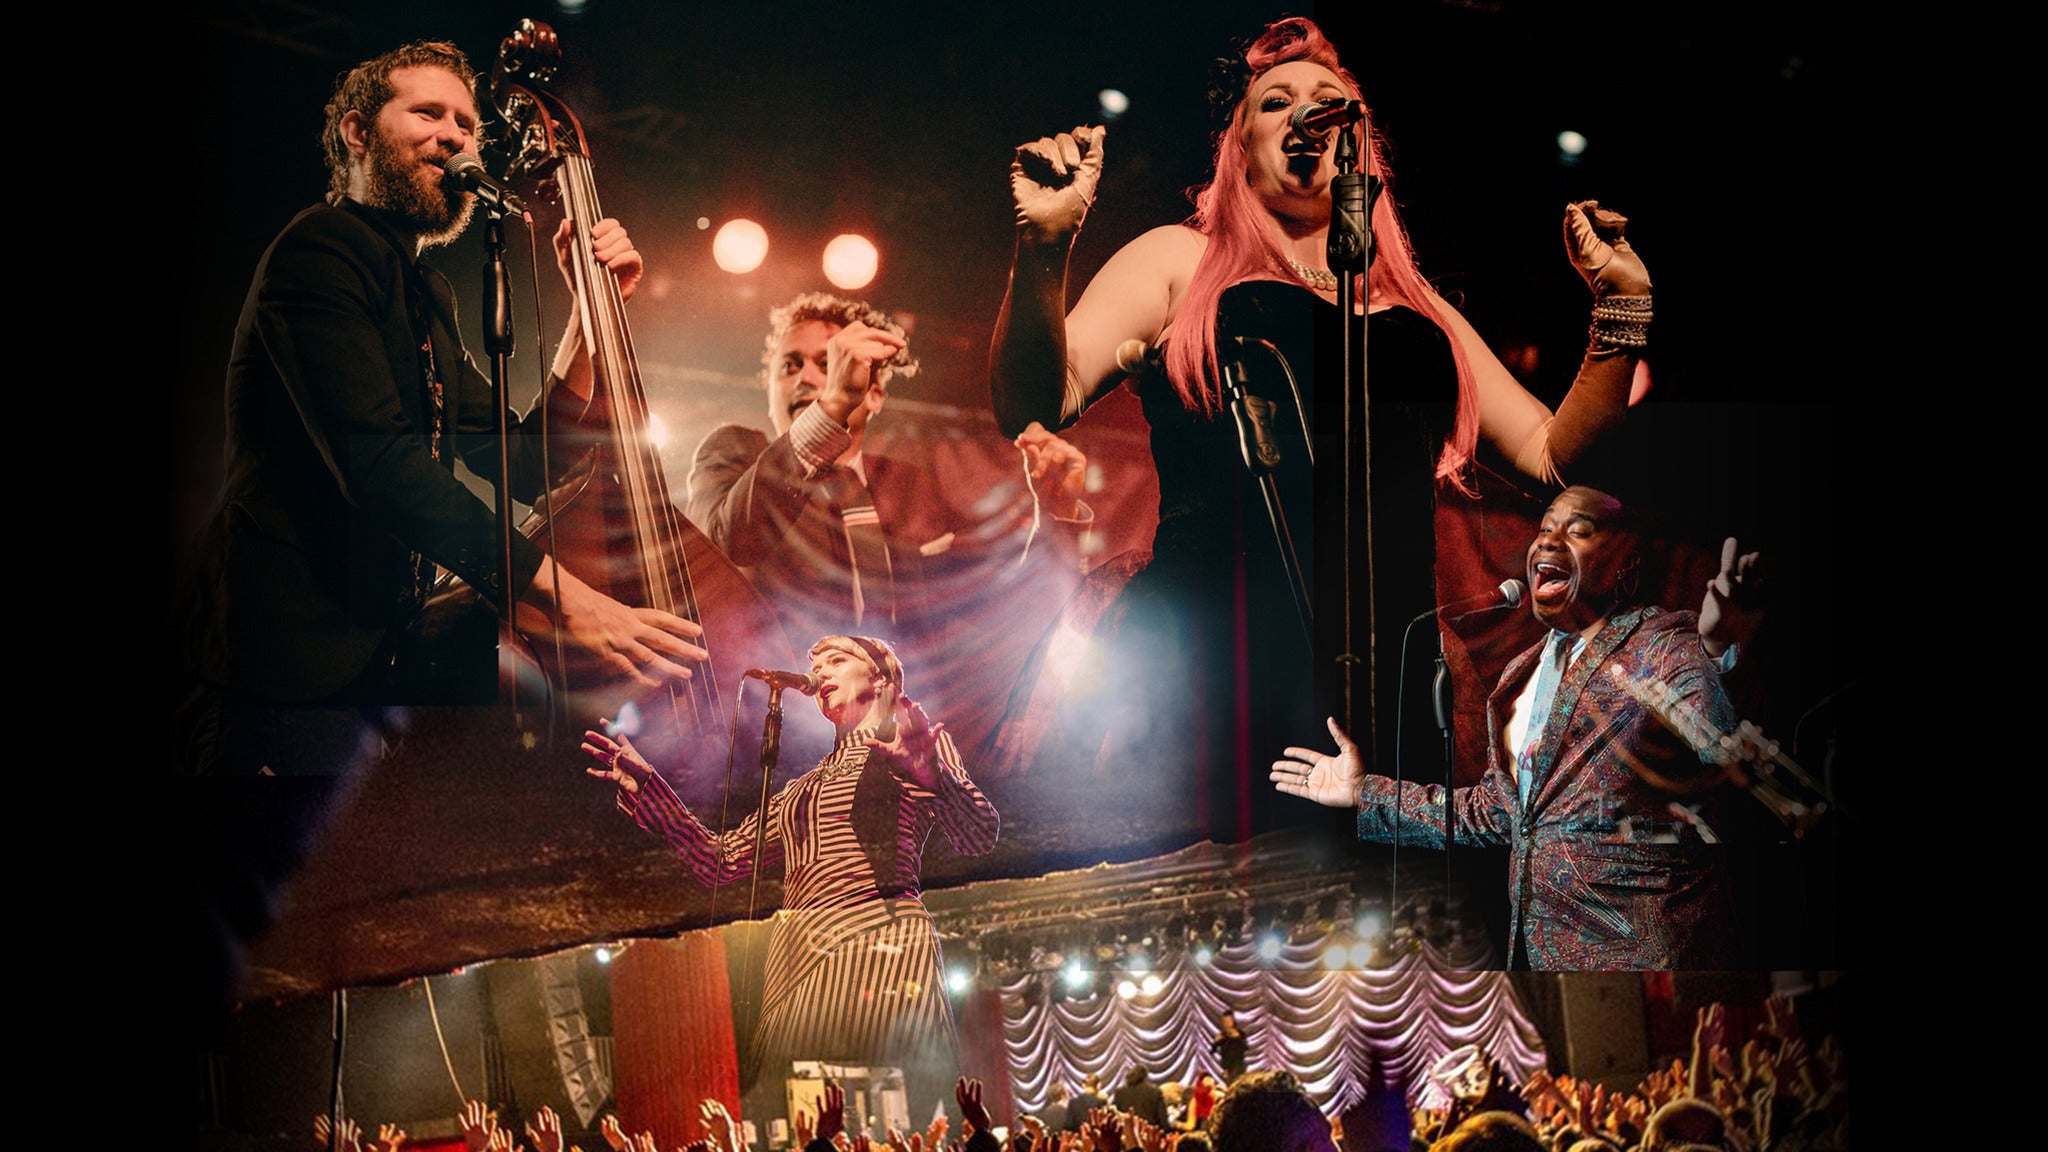 Image used with permission from Ticketmaster | Postmodern Jukebox tickets